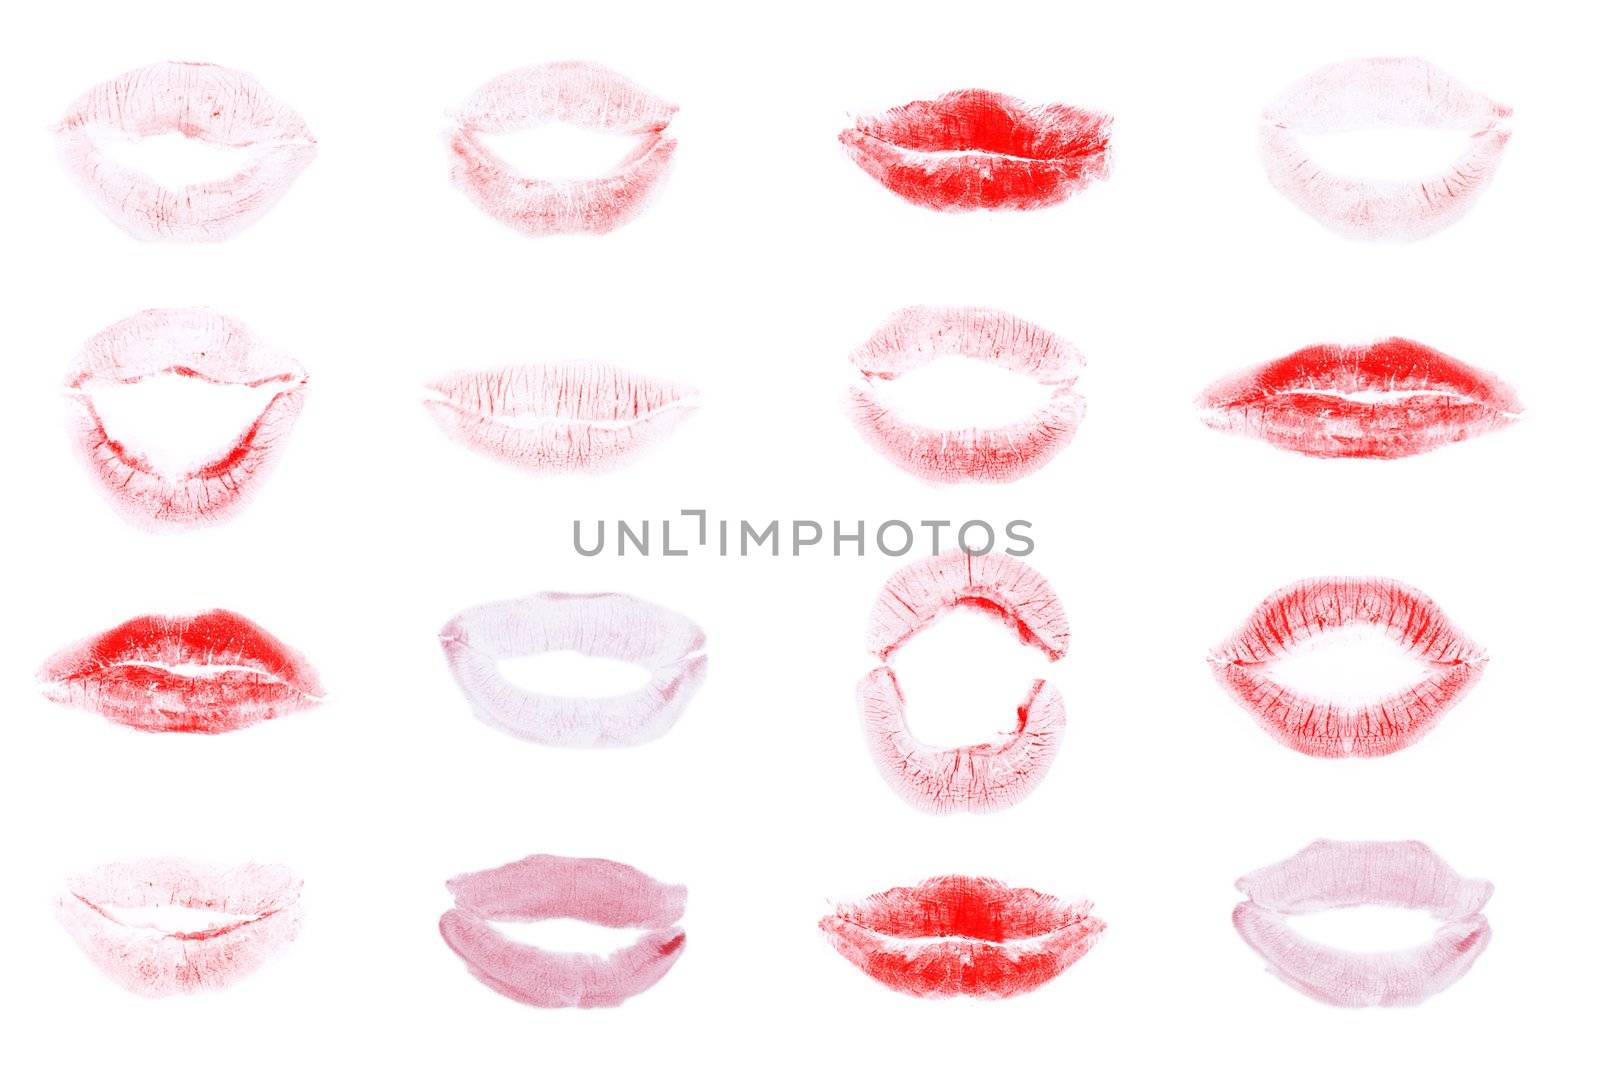 red lips mark, different expressions over white background